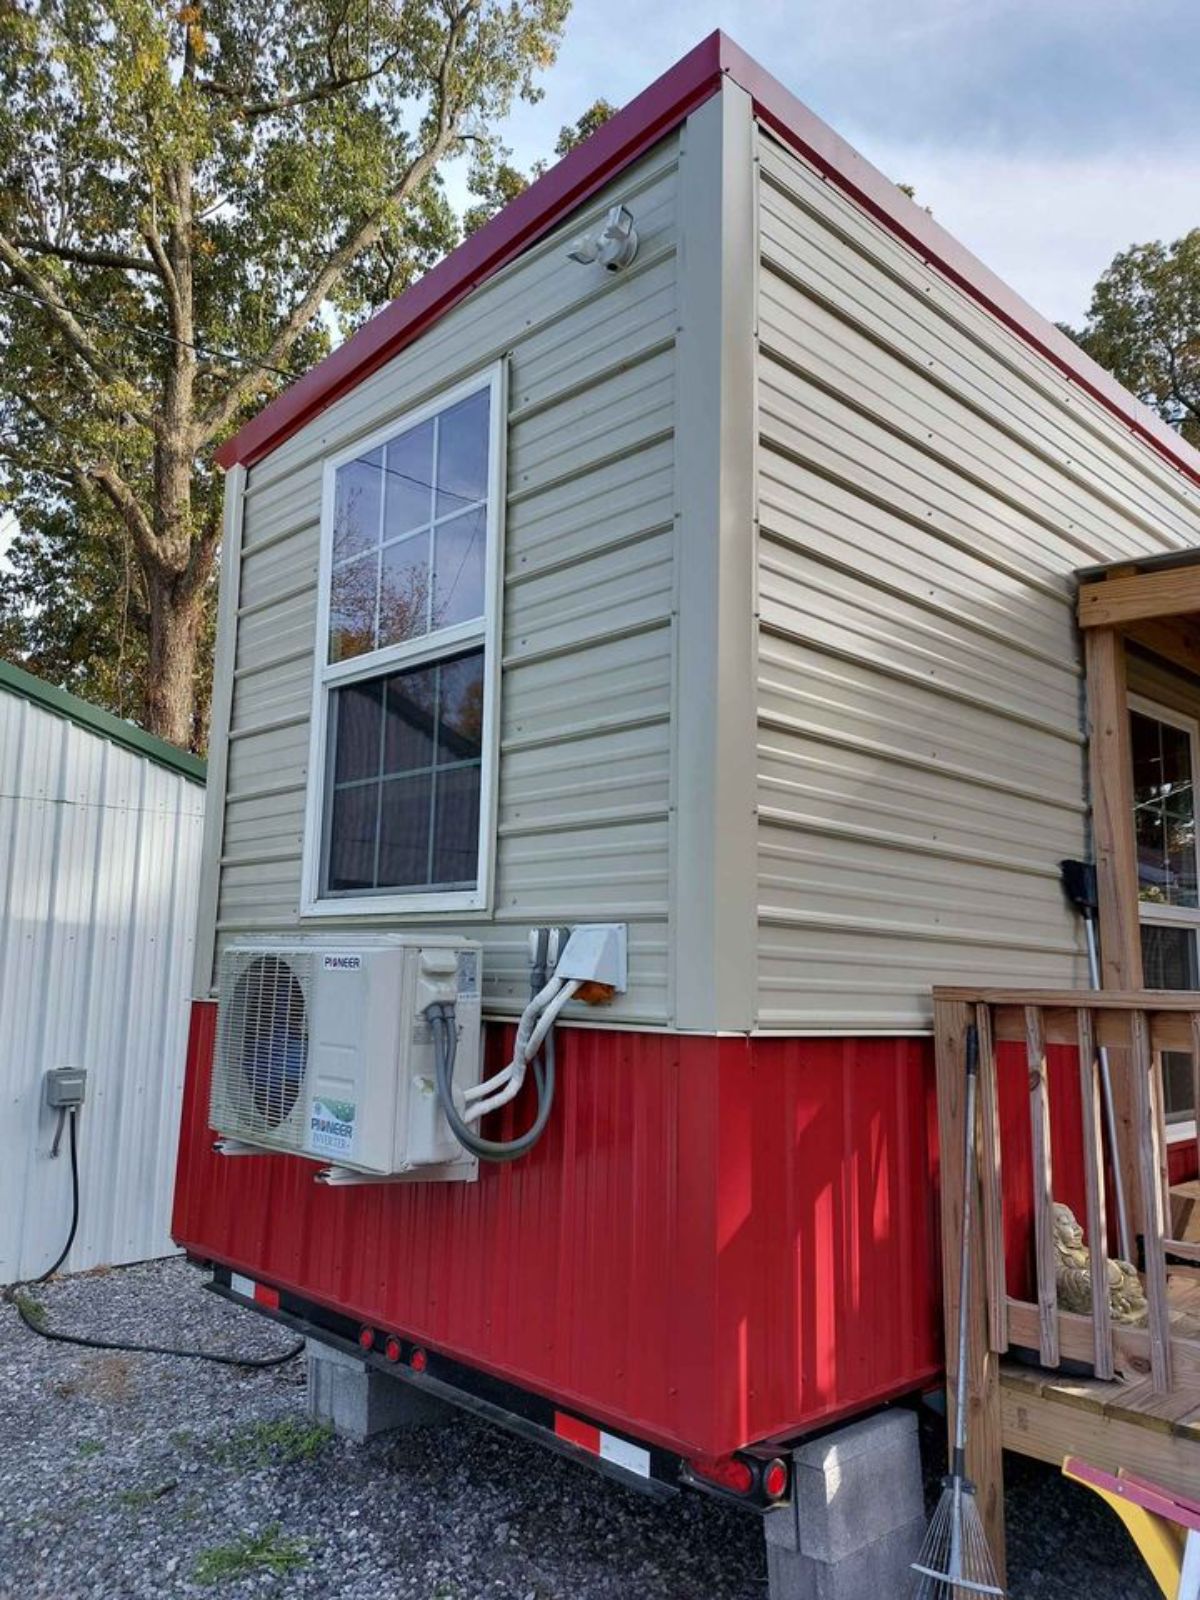 Stunning red and white combination exterior of 24' NOAH Certified Tiny House with Porch